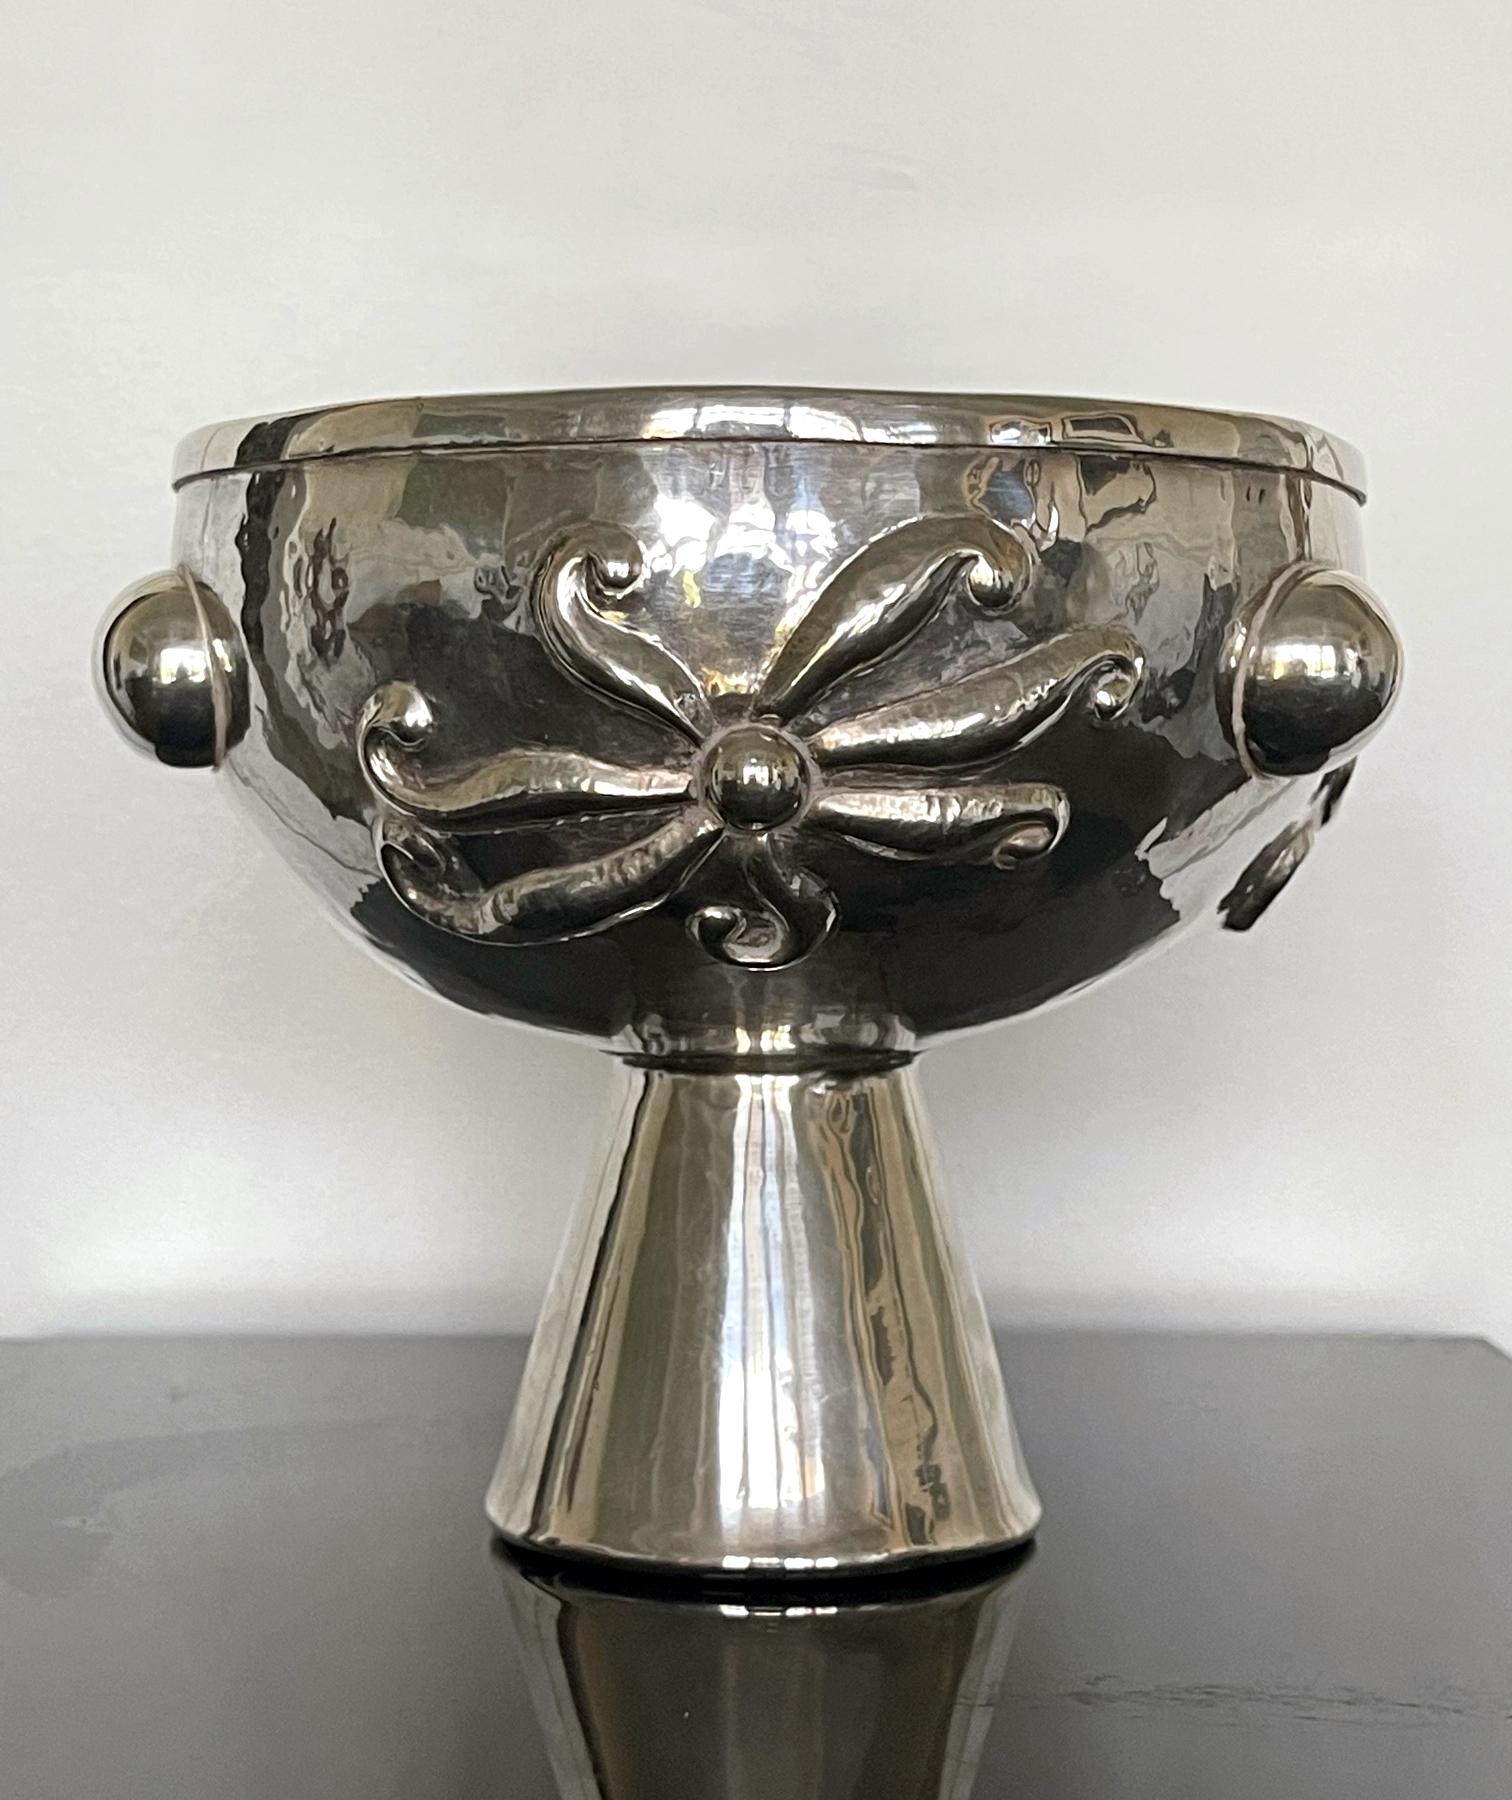 A stunning sterling silver vessel in the form of a stemmed bowl crafted by Graziella Laffi, Lima, Peru, Circa 1965. Marked on the rim: G. Laffi, PERU. The vessel was designed as a modern rendition of ancient pre-Columbina drinking vessel used in